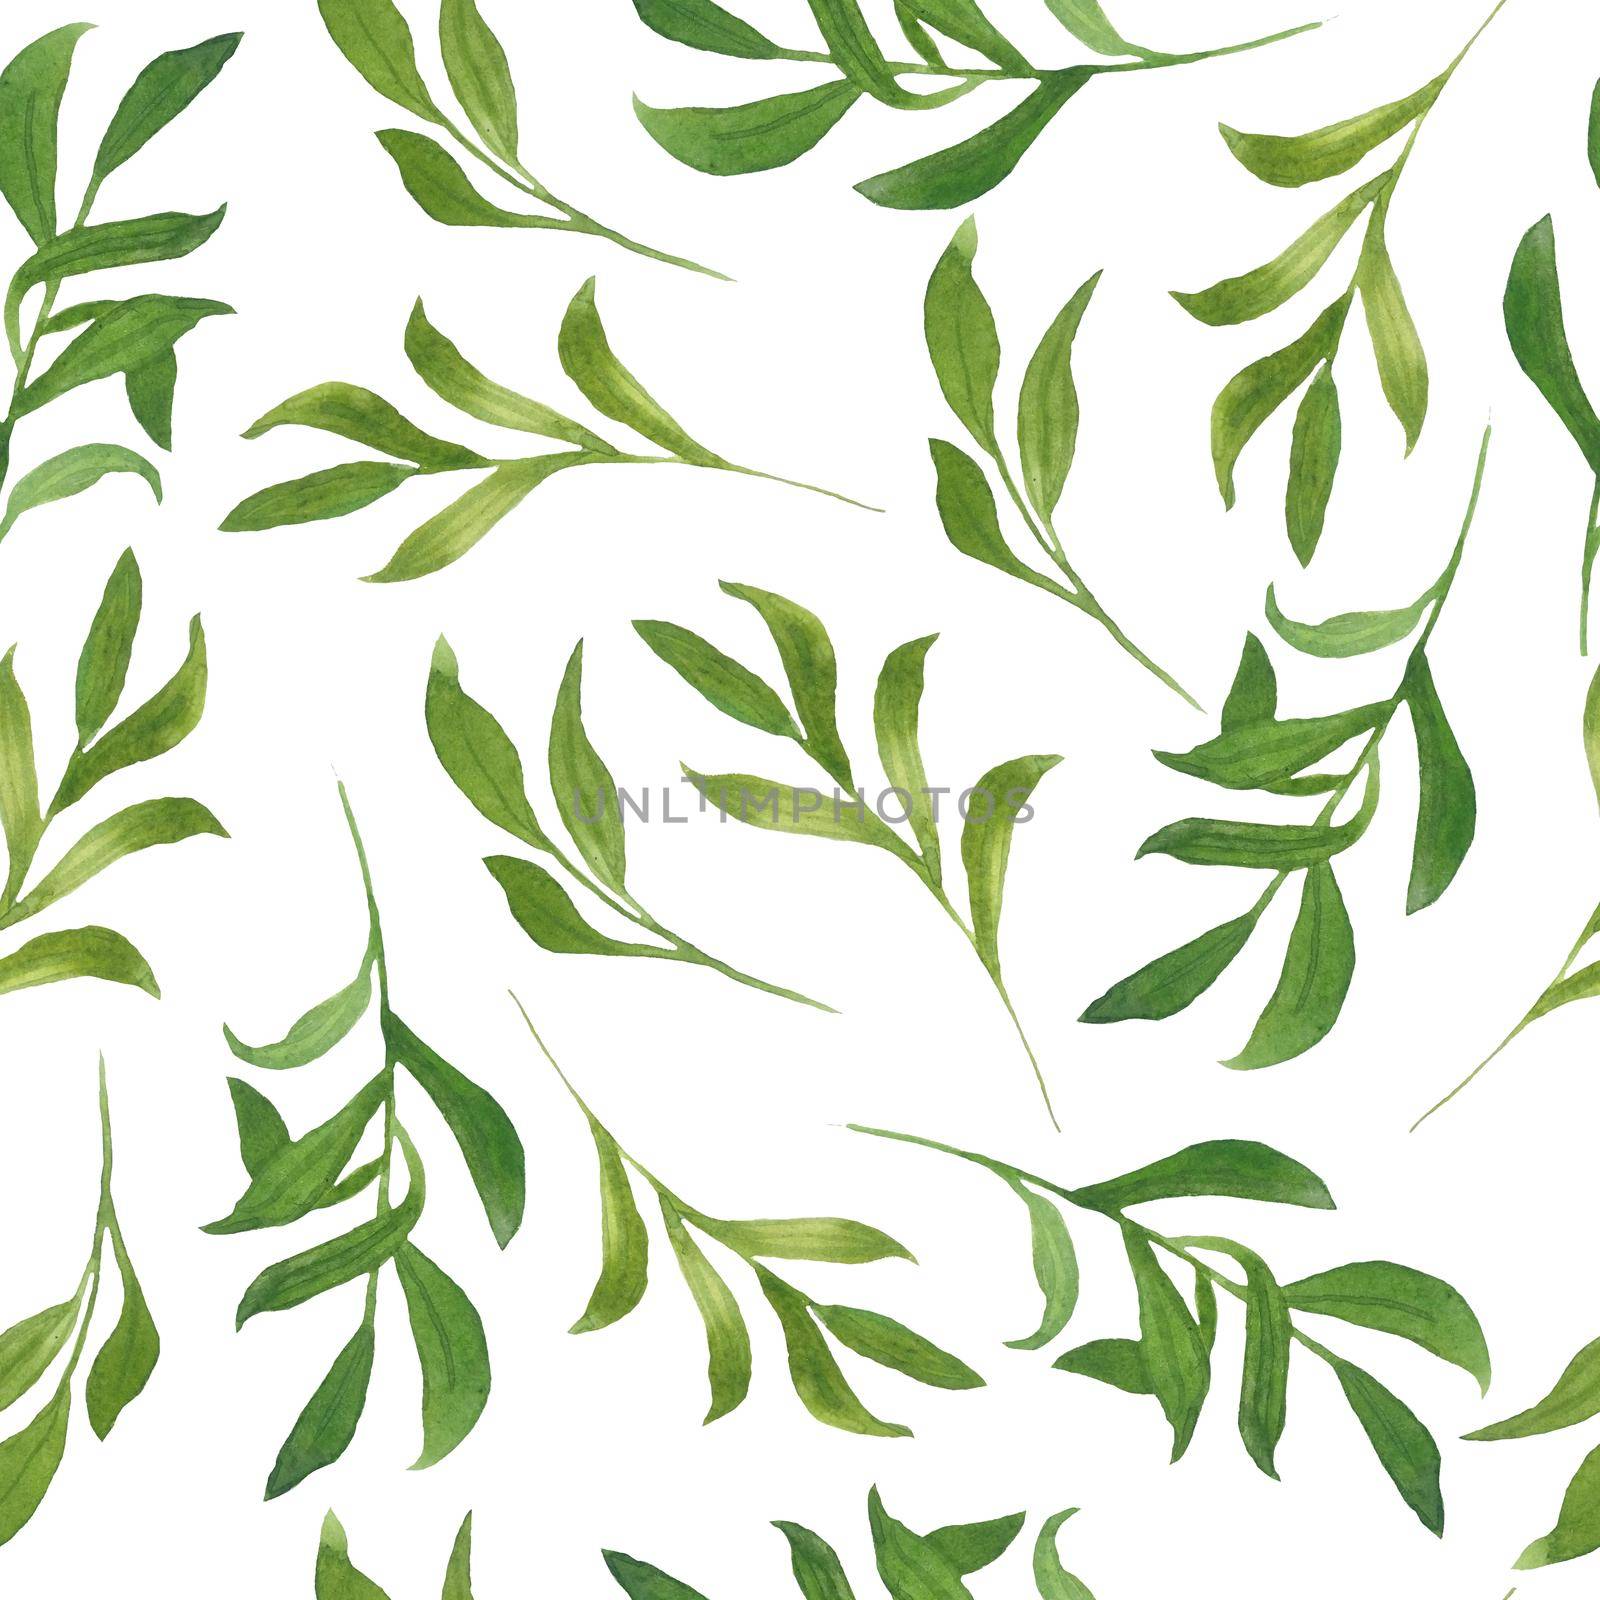 Seamless hand drawn watercolor pattern with green wild herbs flowers leaves in wood woodland forest. Organic natural plants, floral botanical design for wallpapers textile wrapping paper wedding invitation